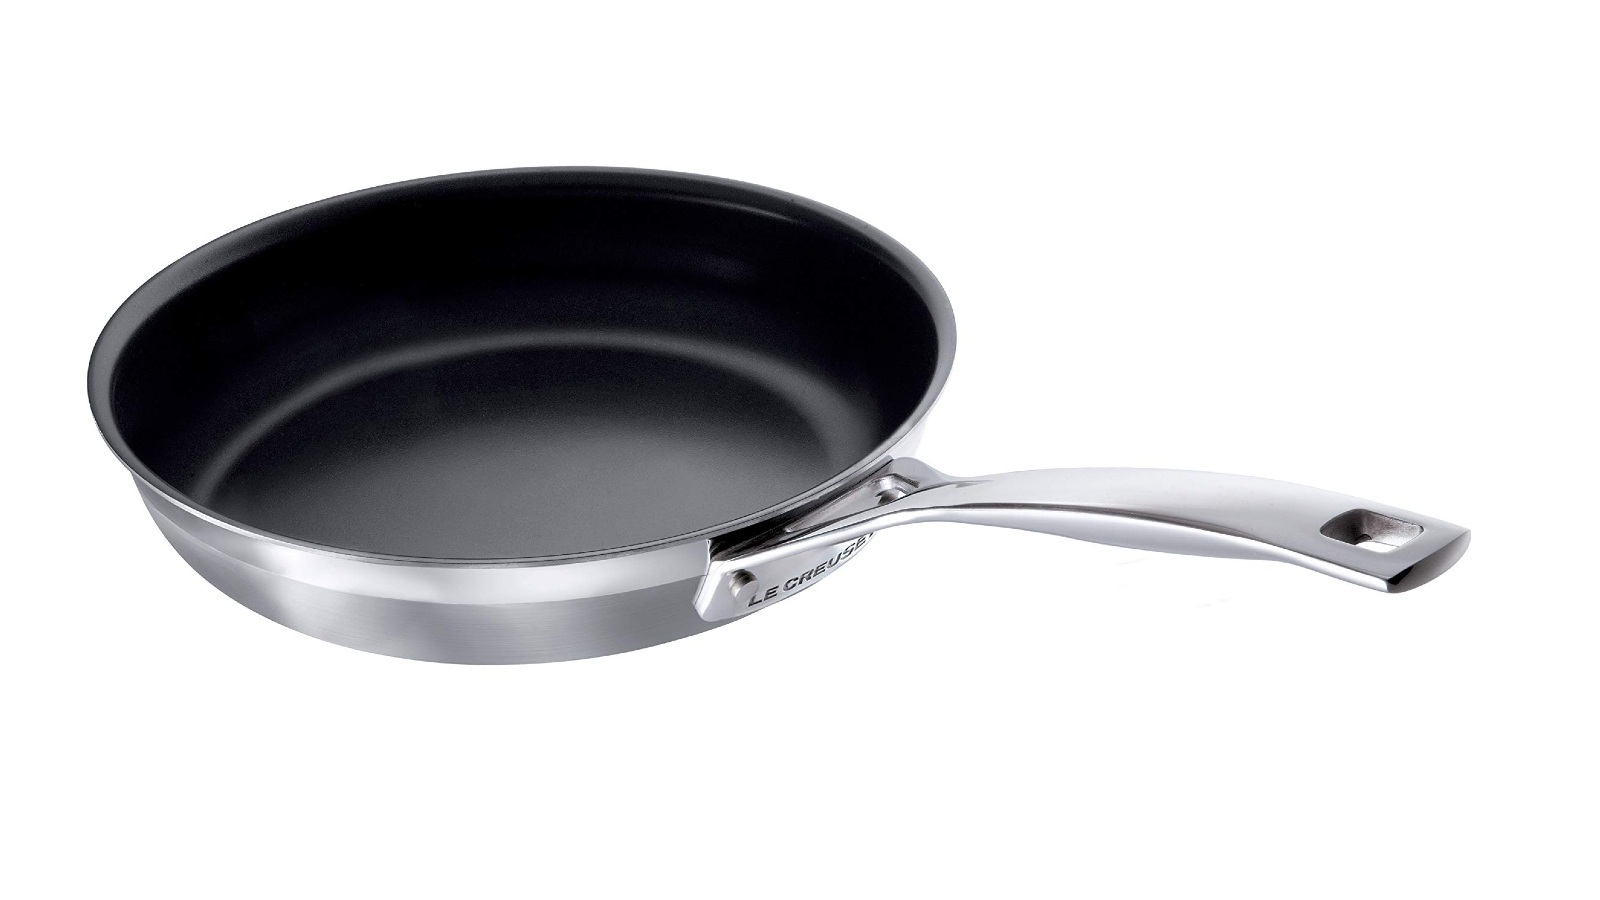 Le Creuset Stainless Steel Saucier Pan with Lid & Reviews